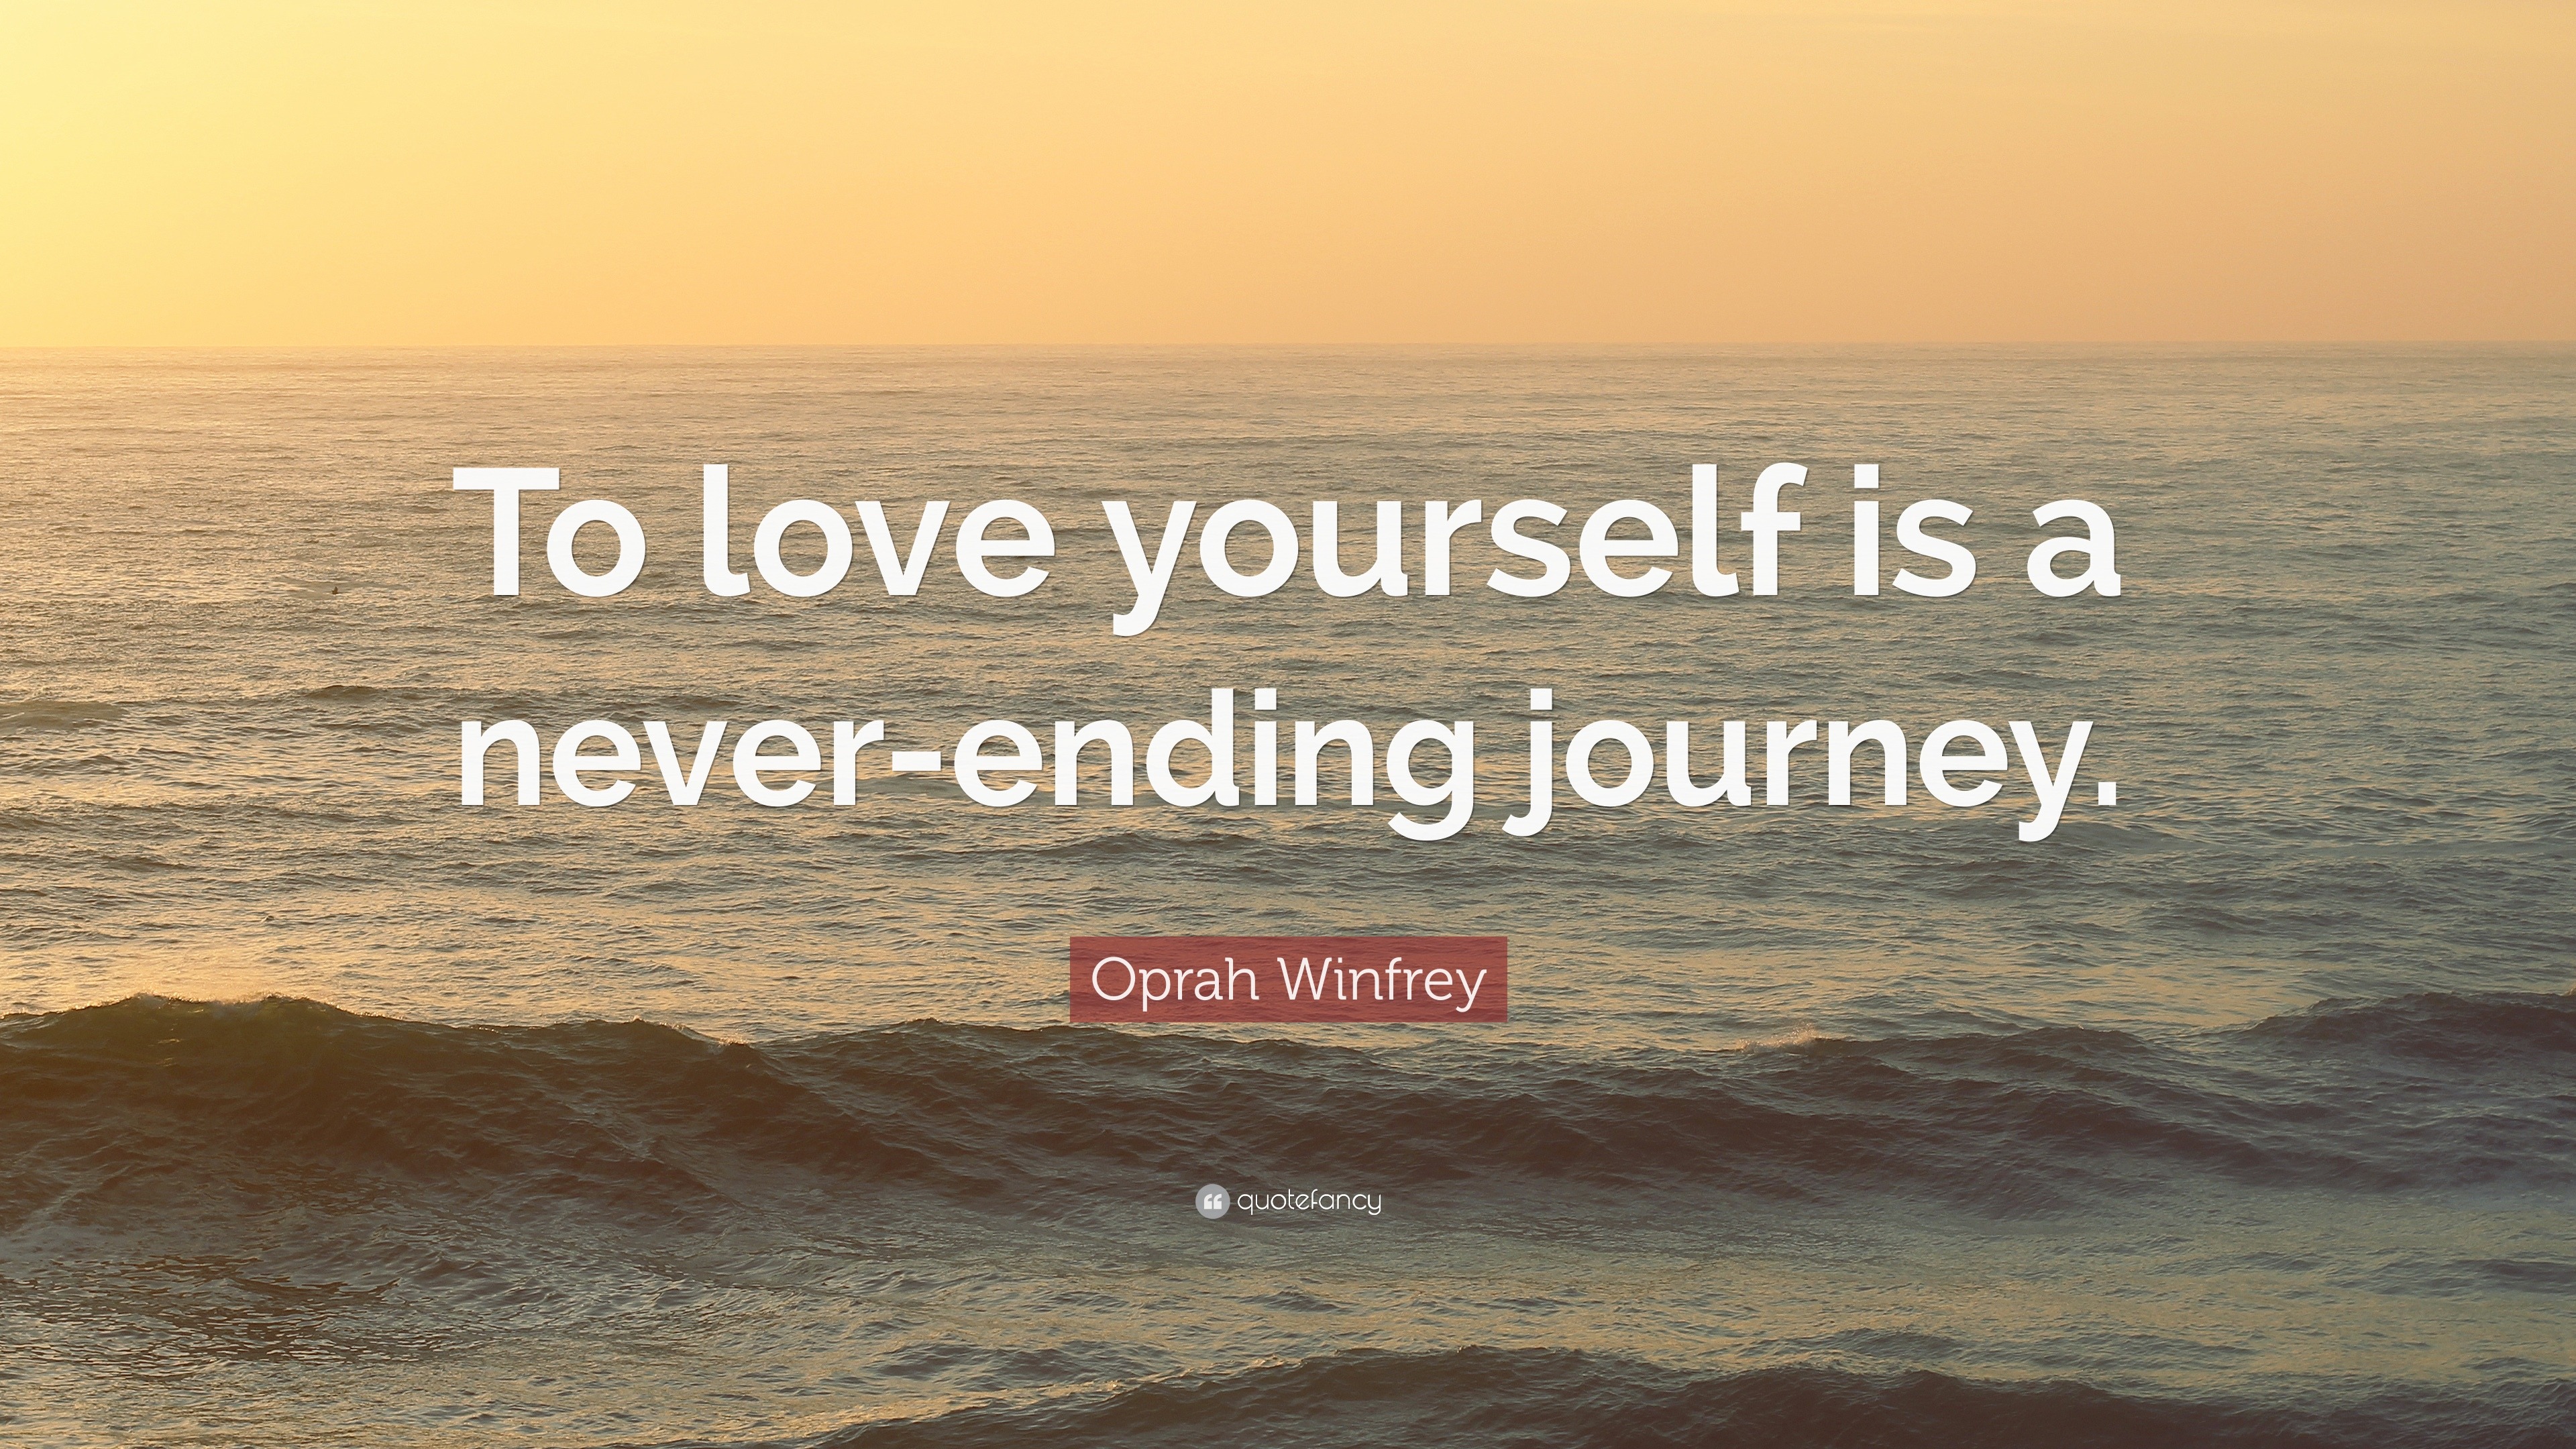 Oprah Winfrey Quote To Love Yourself Is A Never Ending Journey